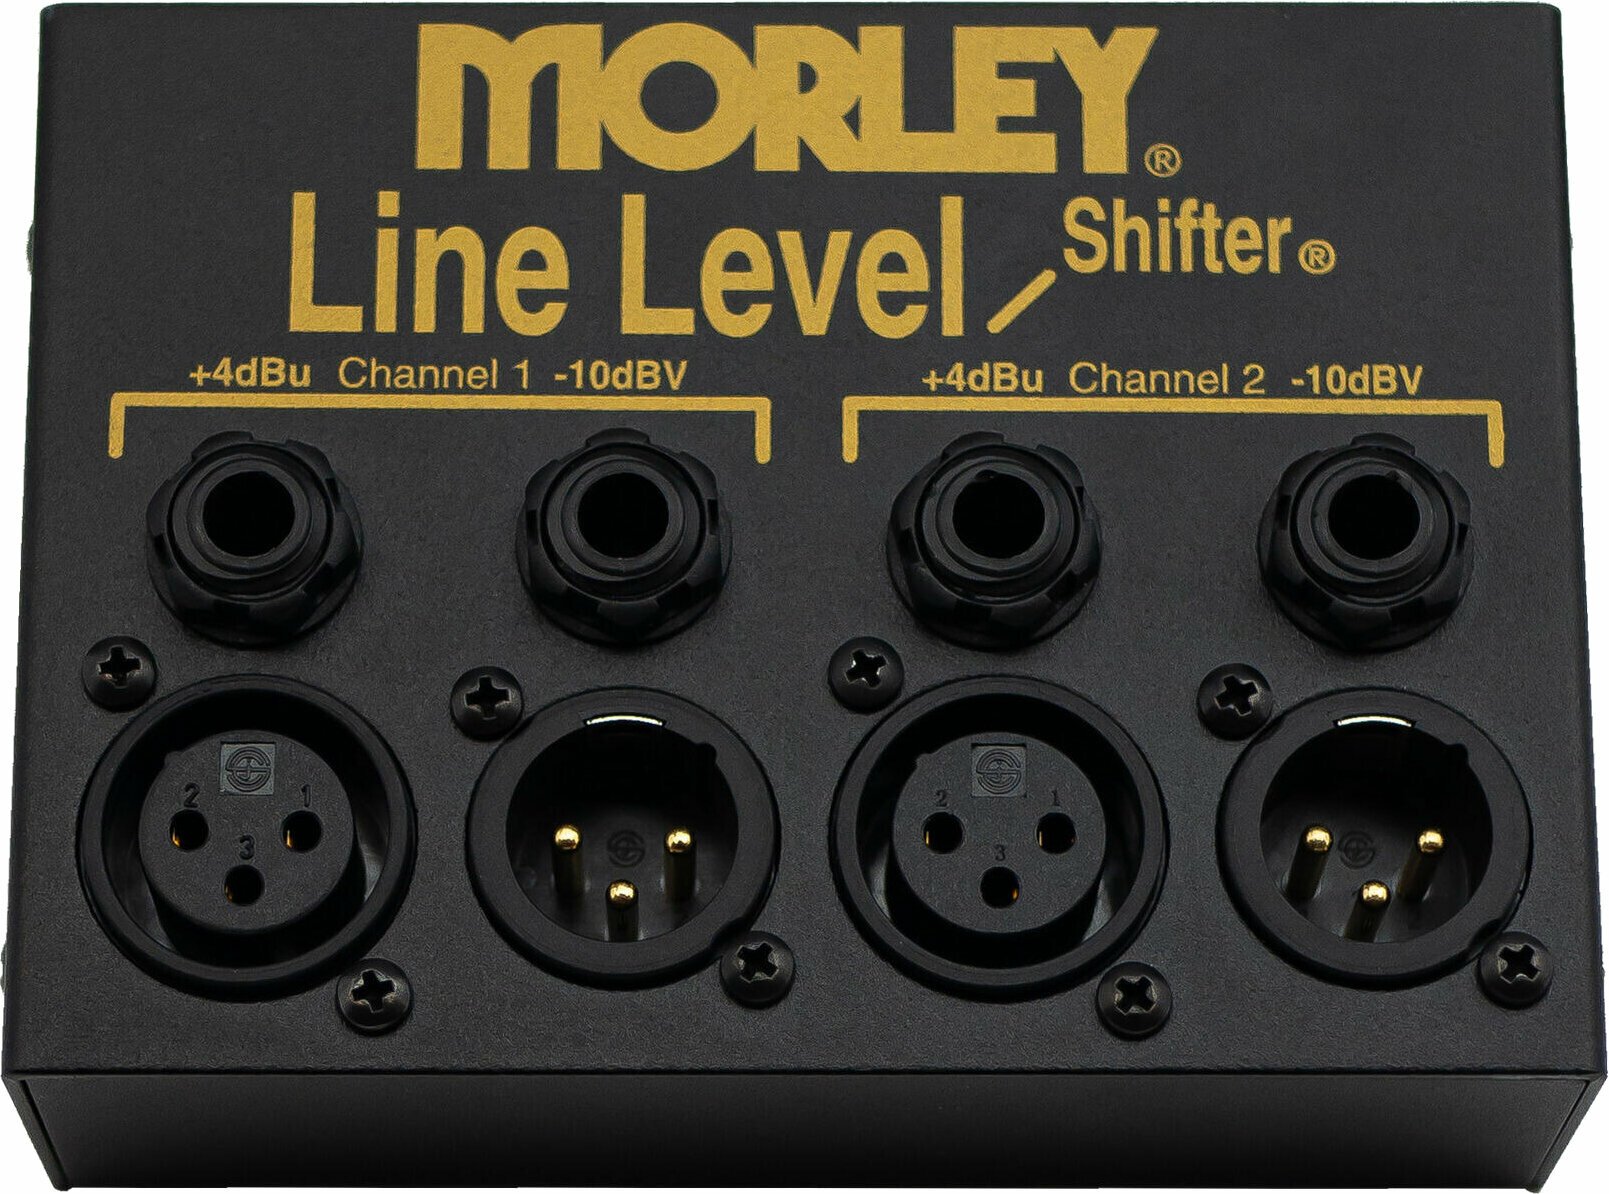 Accessories Morley Line Level Shifter